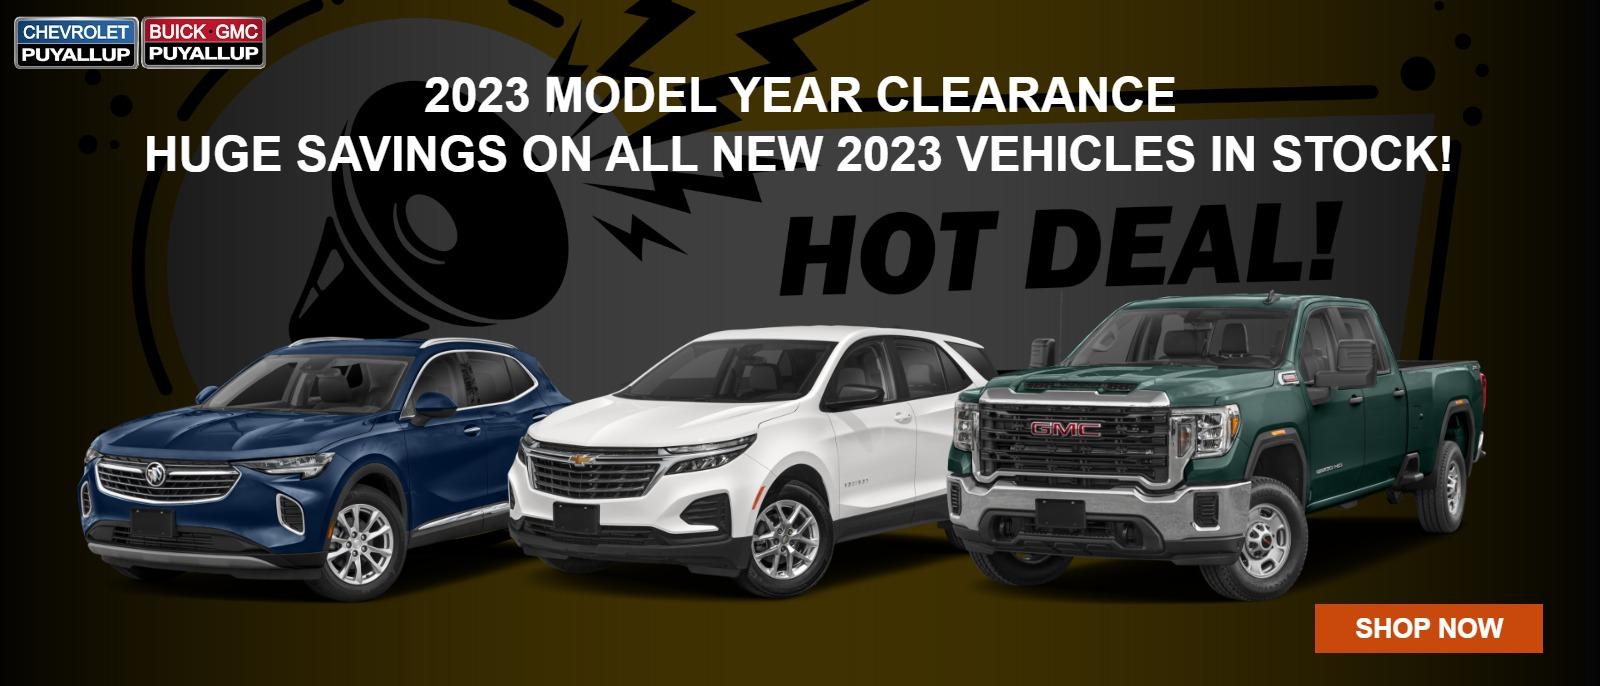 2023 Model Year End Sale Event
Huge savings on all New 2023 vehicles in stock!